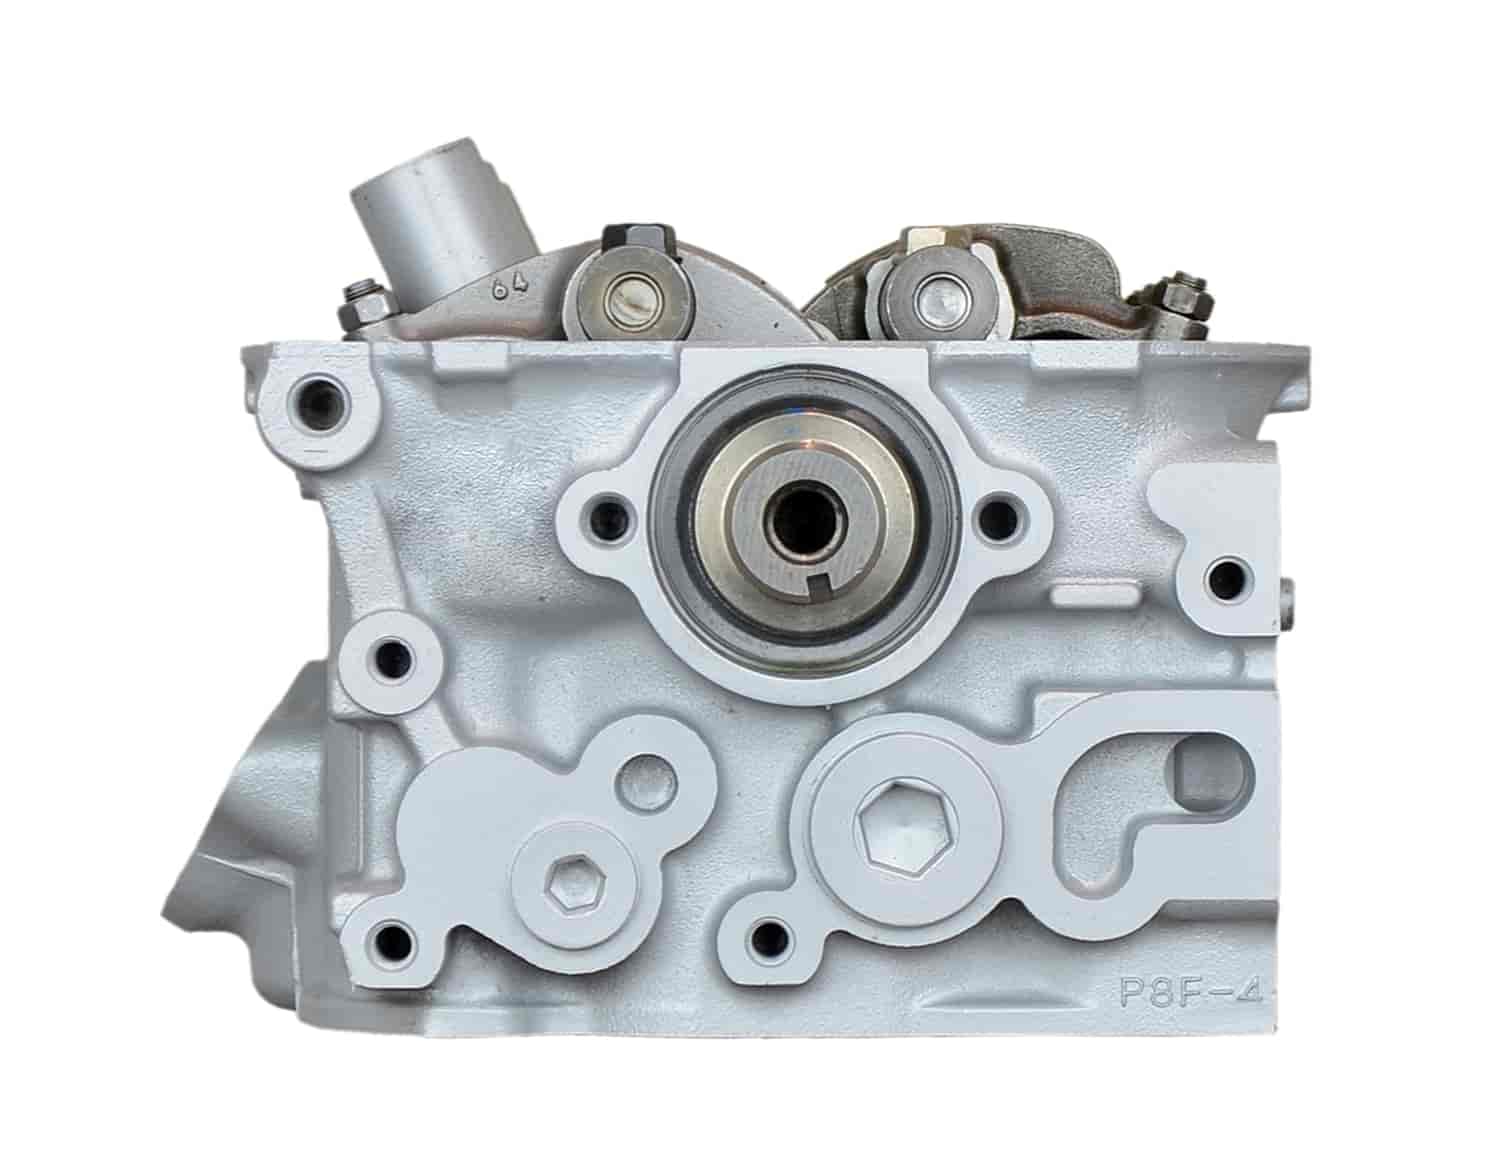 Remanufactured Cylinder Head for 1999-2001 Honda Odyssey with